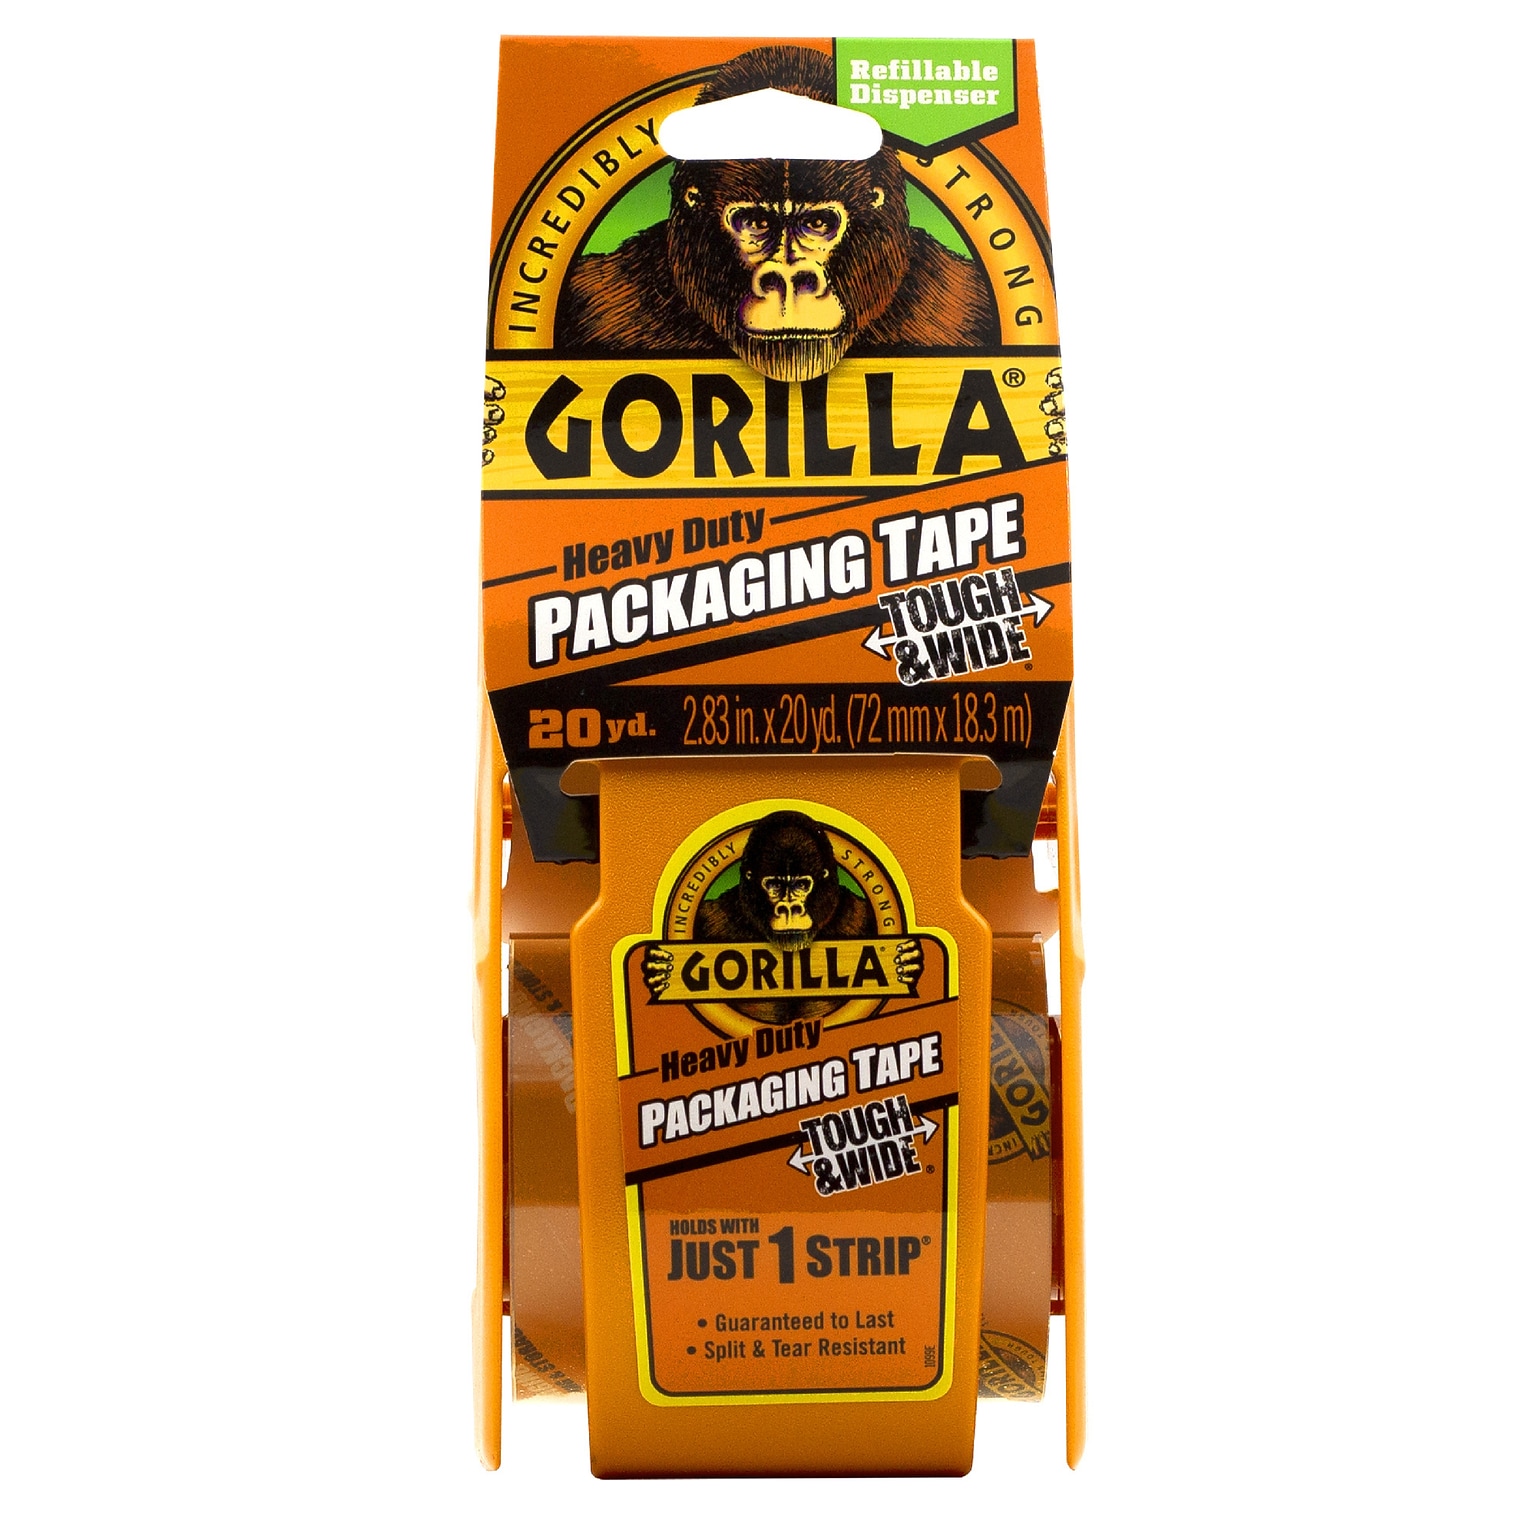 Gorilla Heavy Duty Tough & Wide Packaging Tape with Dispenser, 2.88 x 20 yds., Clear (6020001)